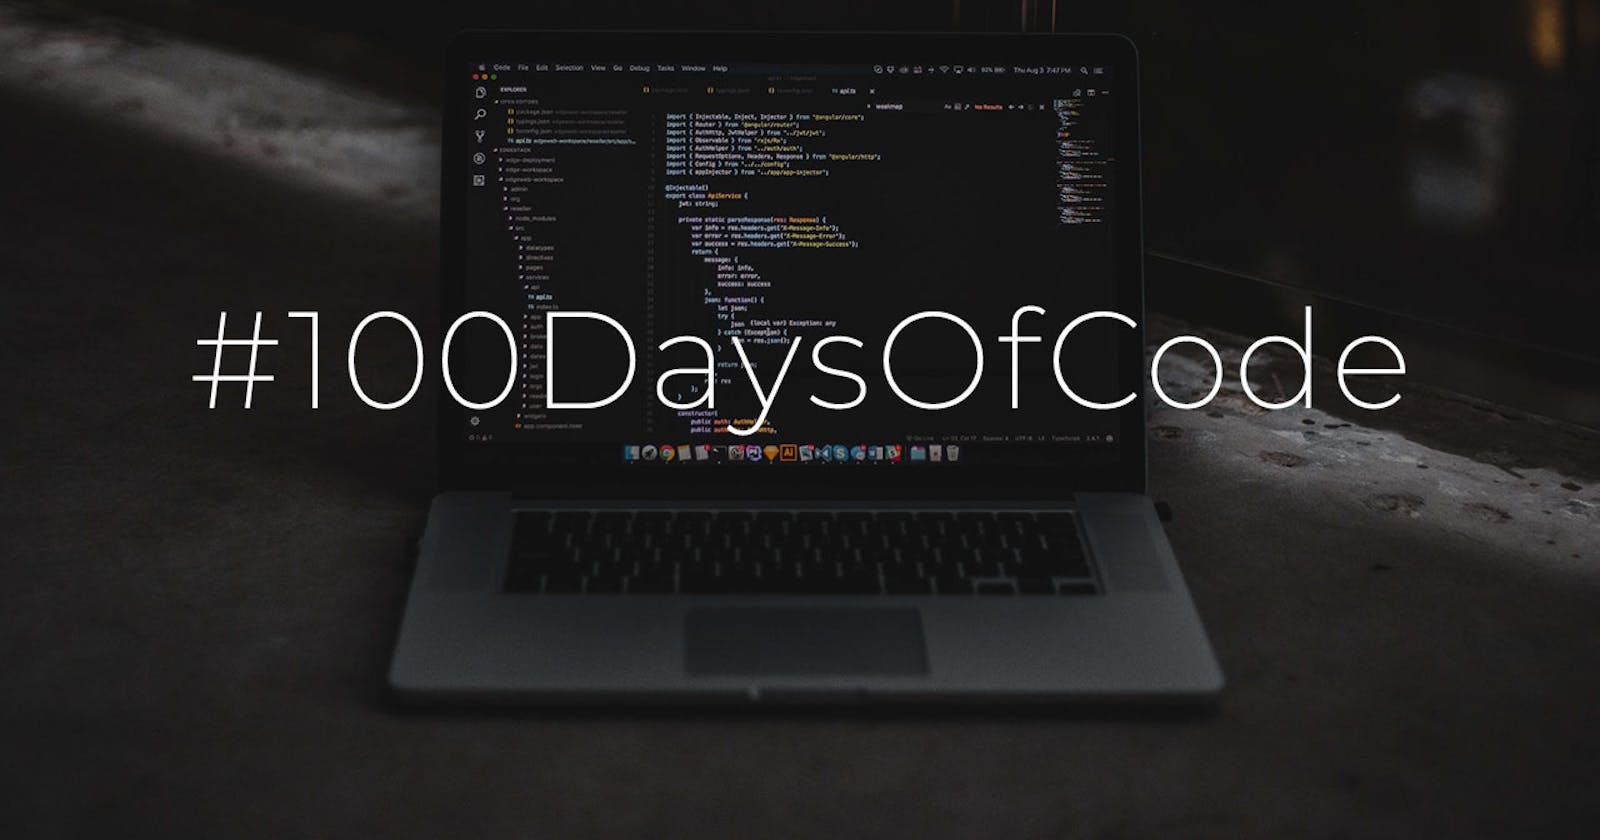 How I Completed the 100 Days of Code Challenge